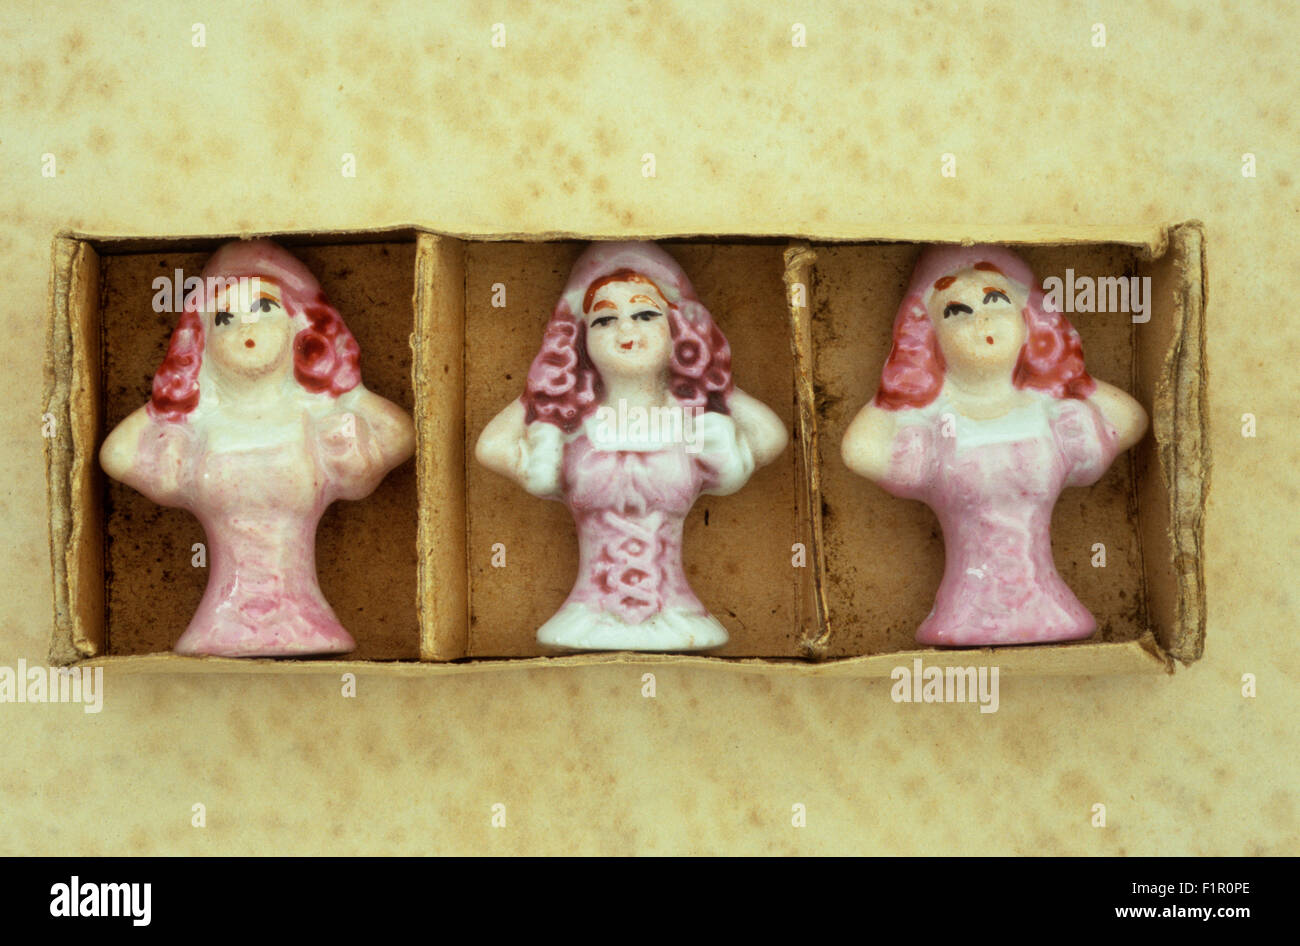 Three porcelain half-dolls from pin-cushions in pink bodices identical but painted differently in cardboard box Stock Photo